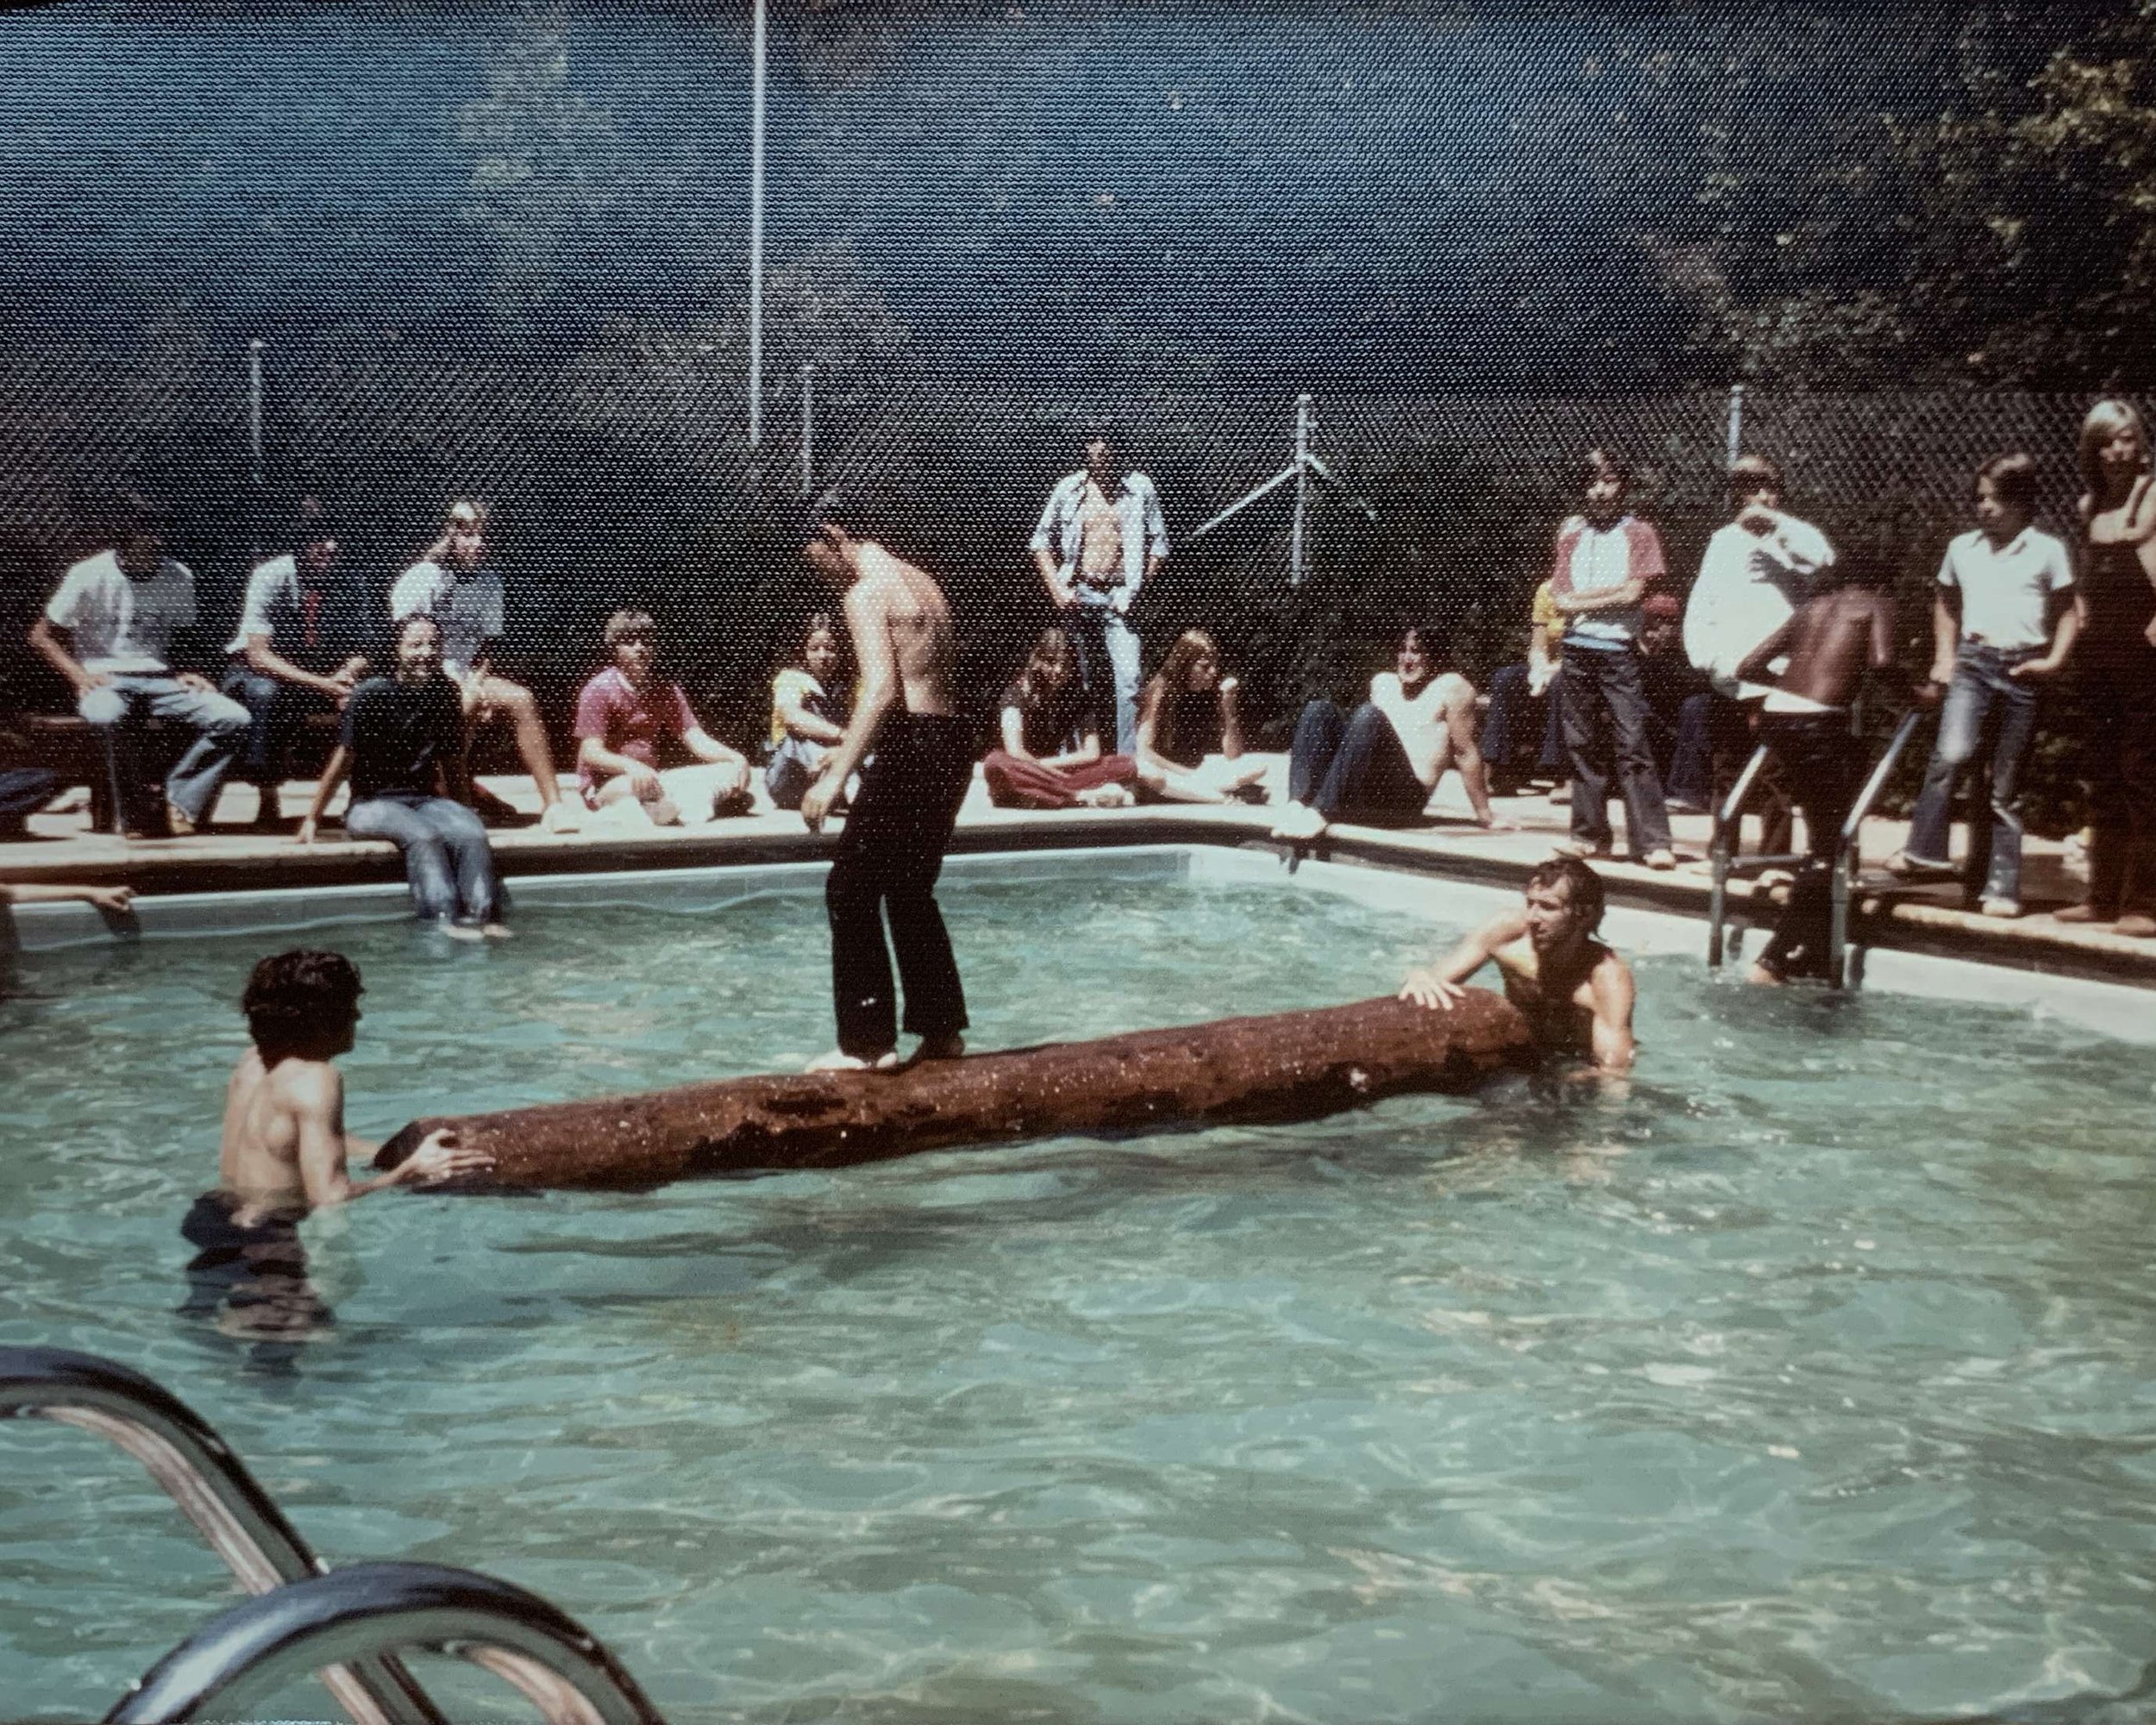 Campers in Railroad Camp participating in a log rolling competition in 1977